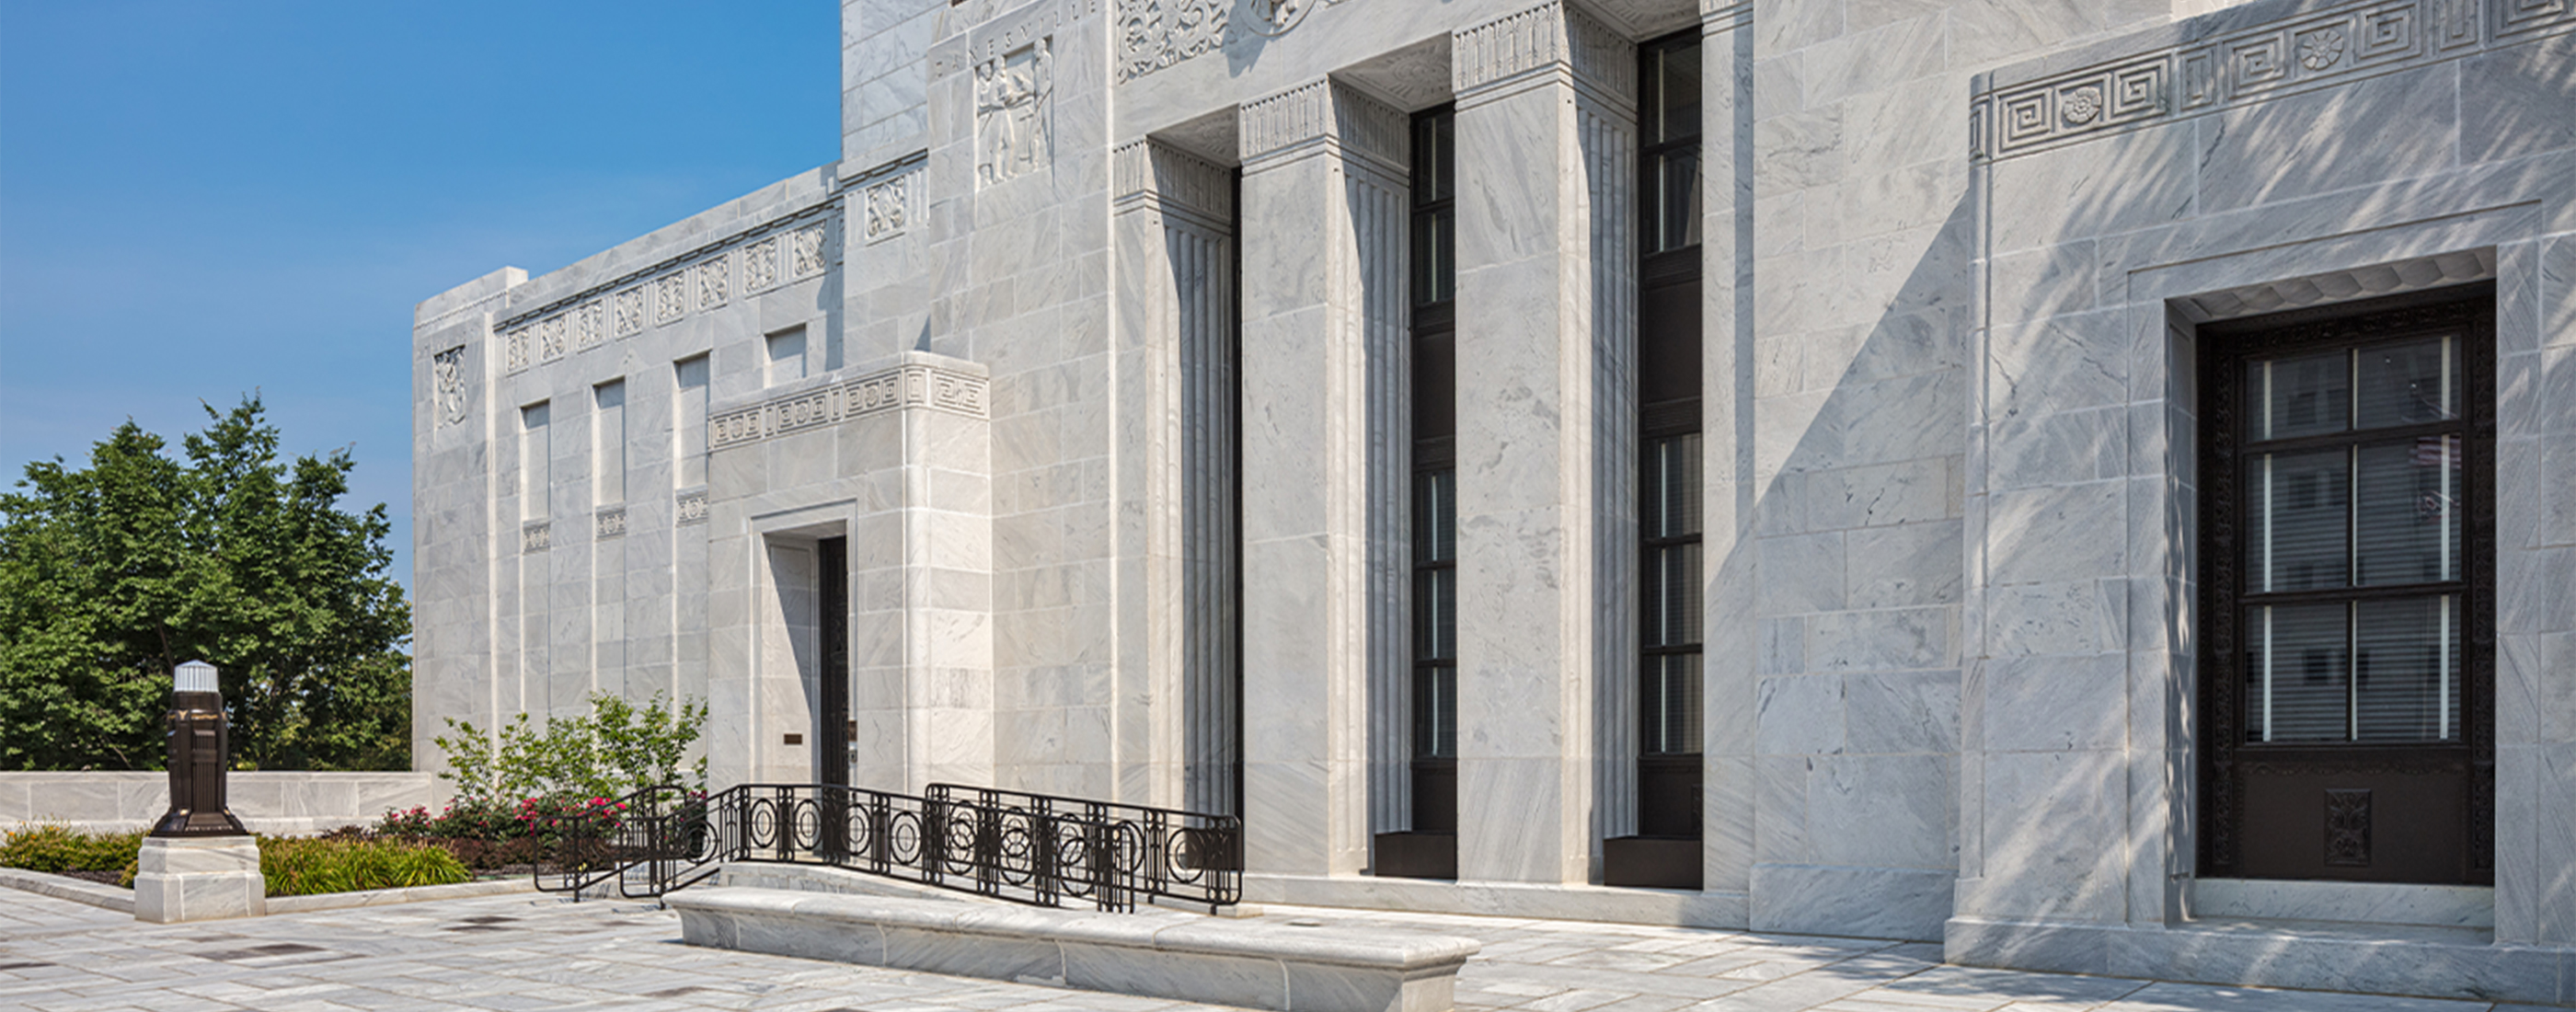 The Ohio Supreme Court exterior and plaza including newly restored bronze handrails.